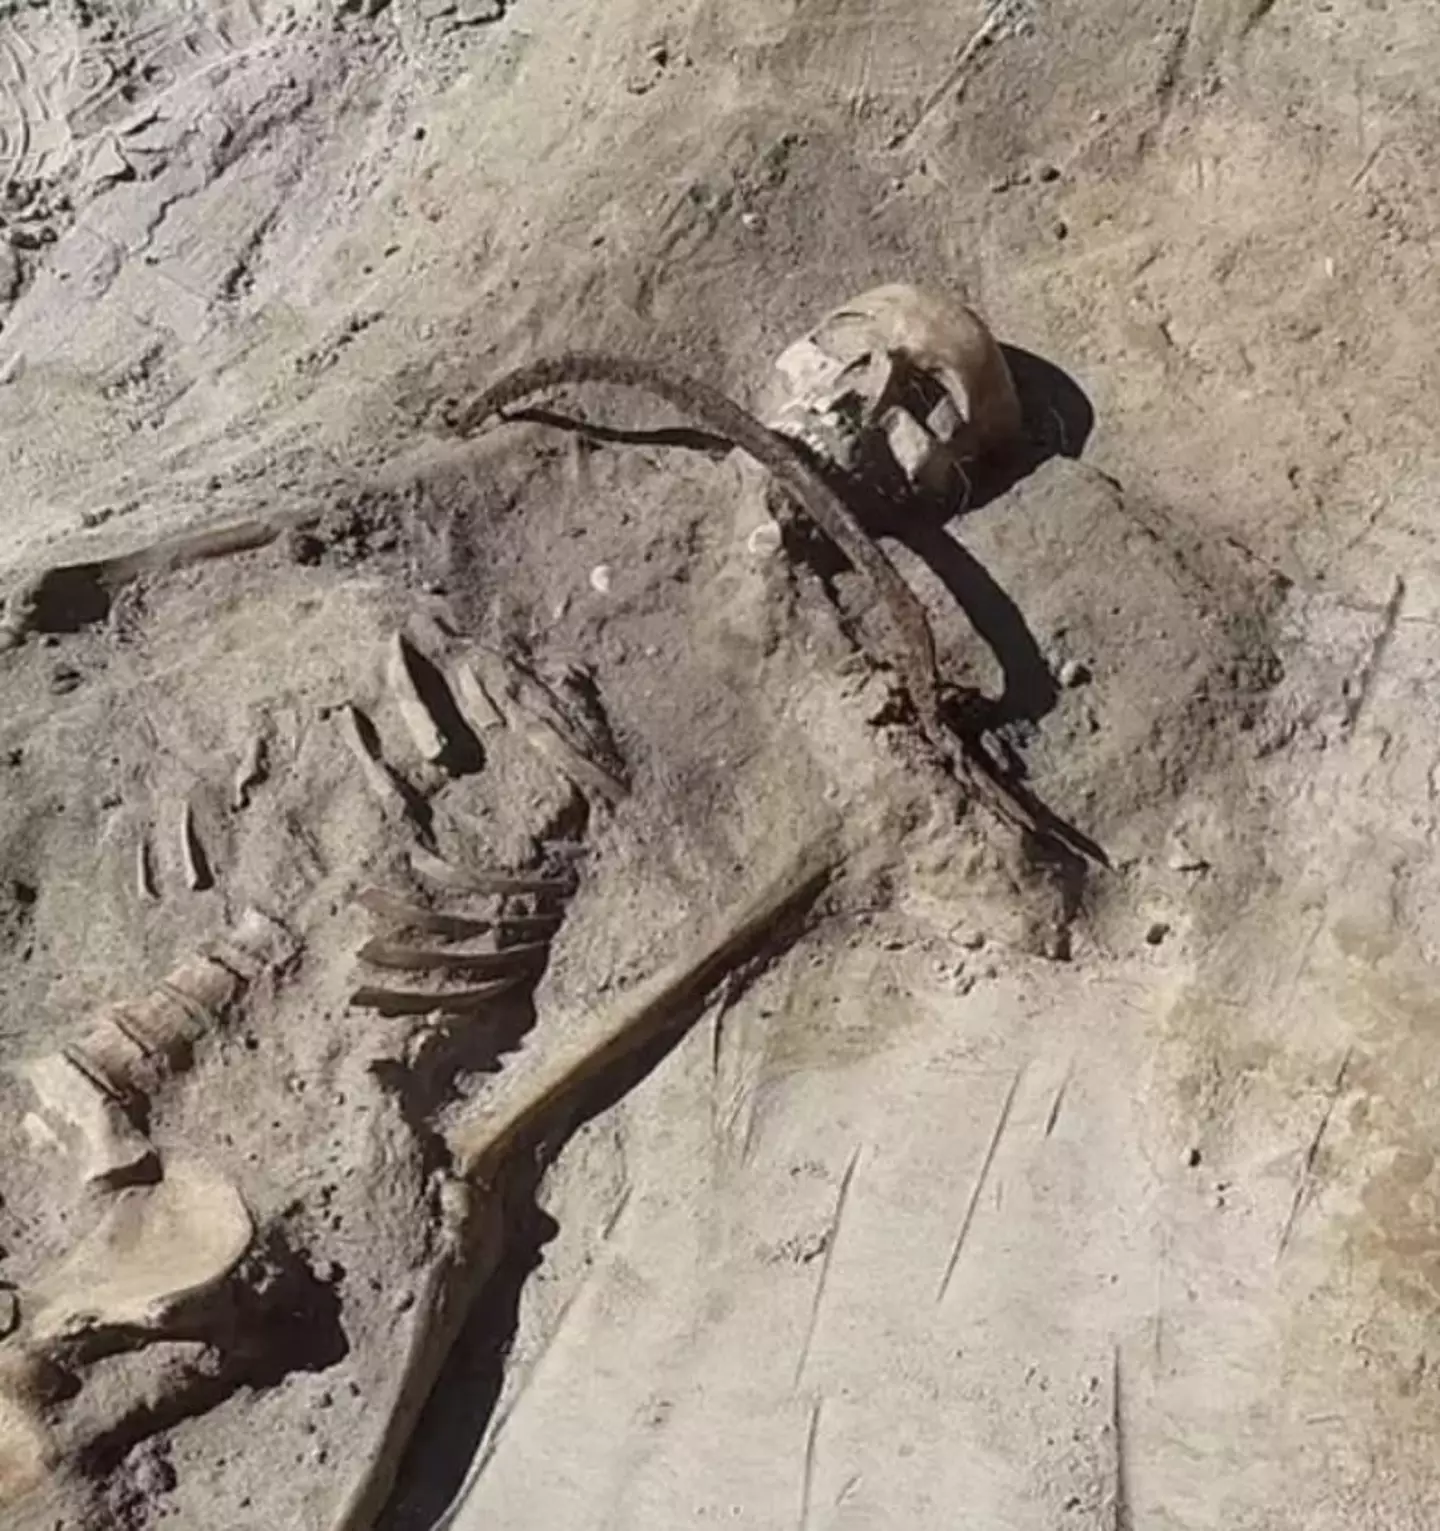 The 'vampire' skeleton had a sickle over the throat.